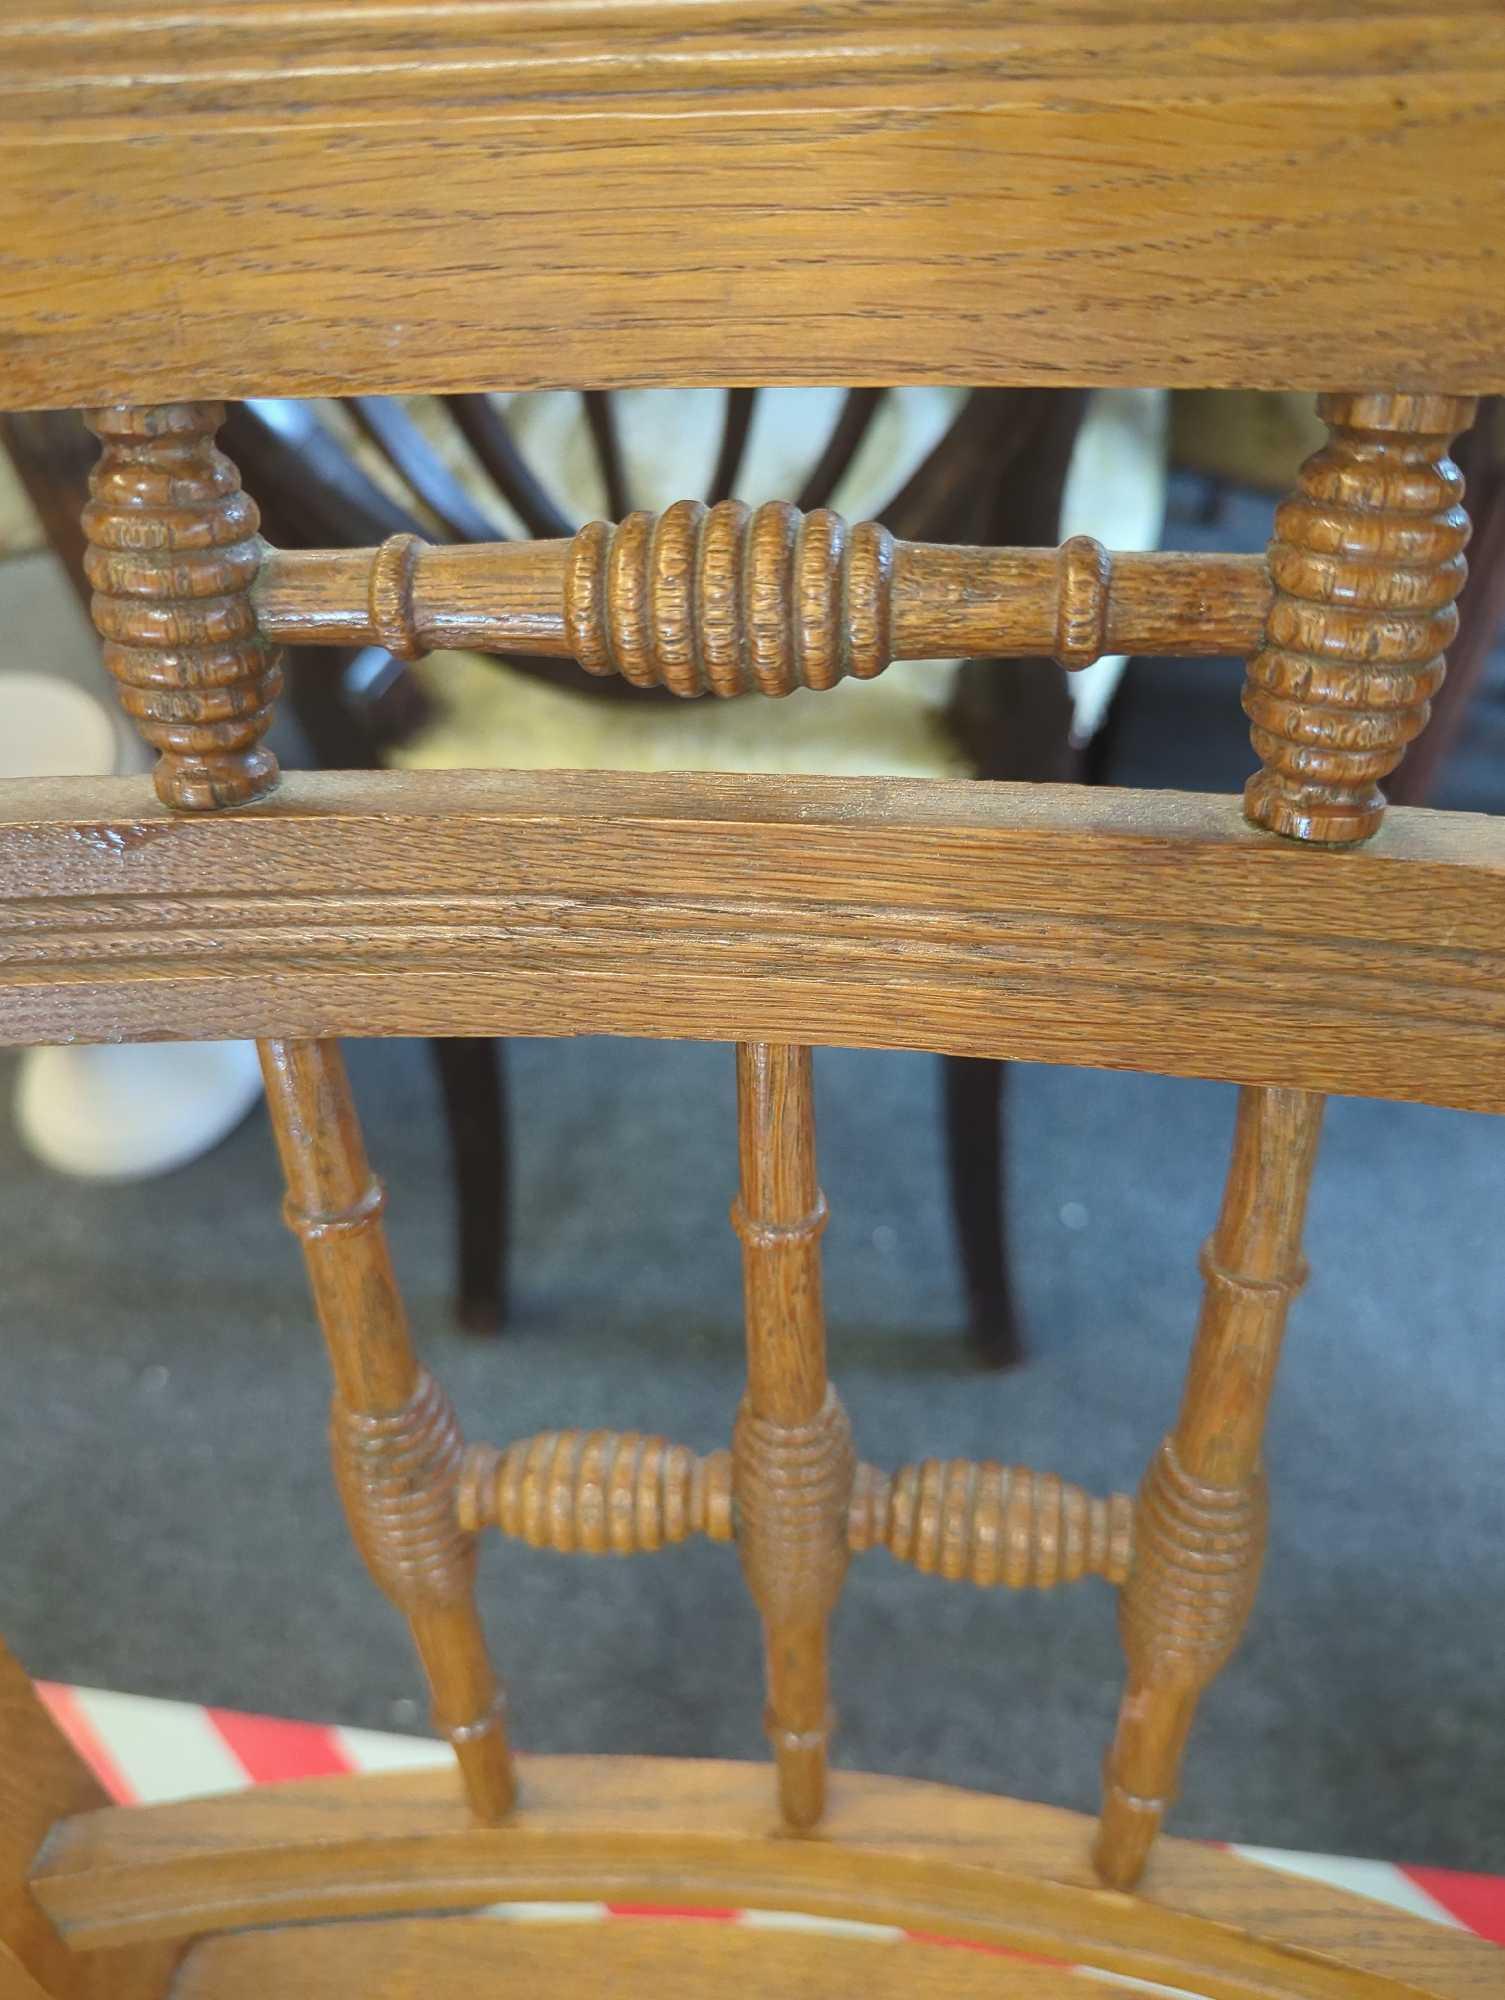 Antique Cane Bottom Chair, With a Honey Dipper Backing and Legs, Measure Approximately 16 in x 15 in